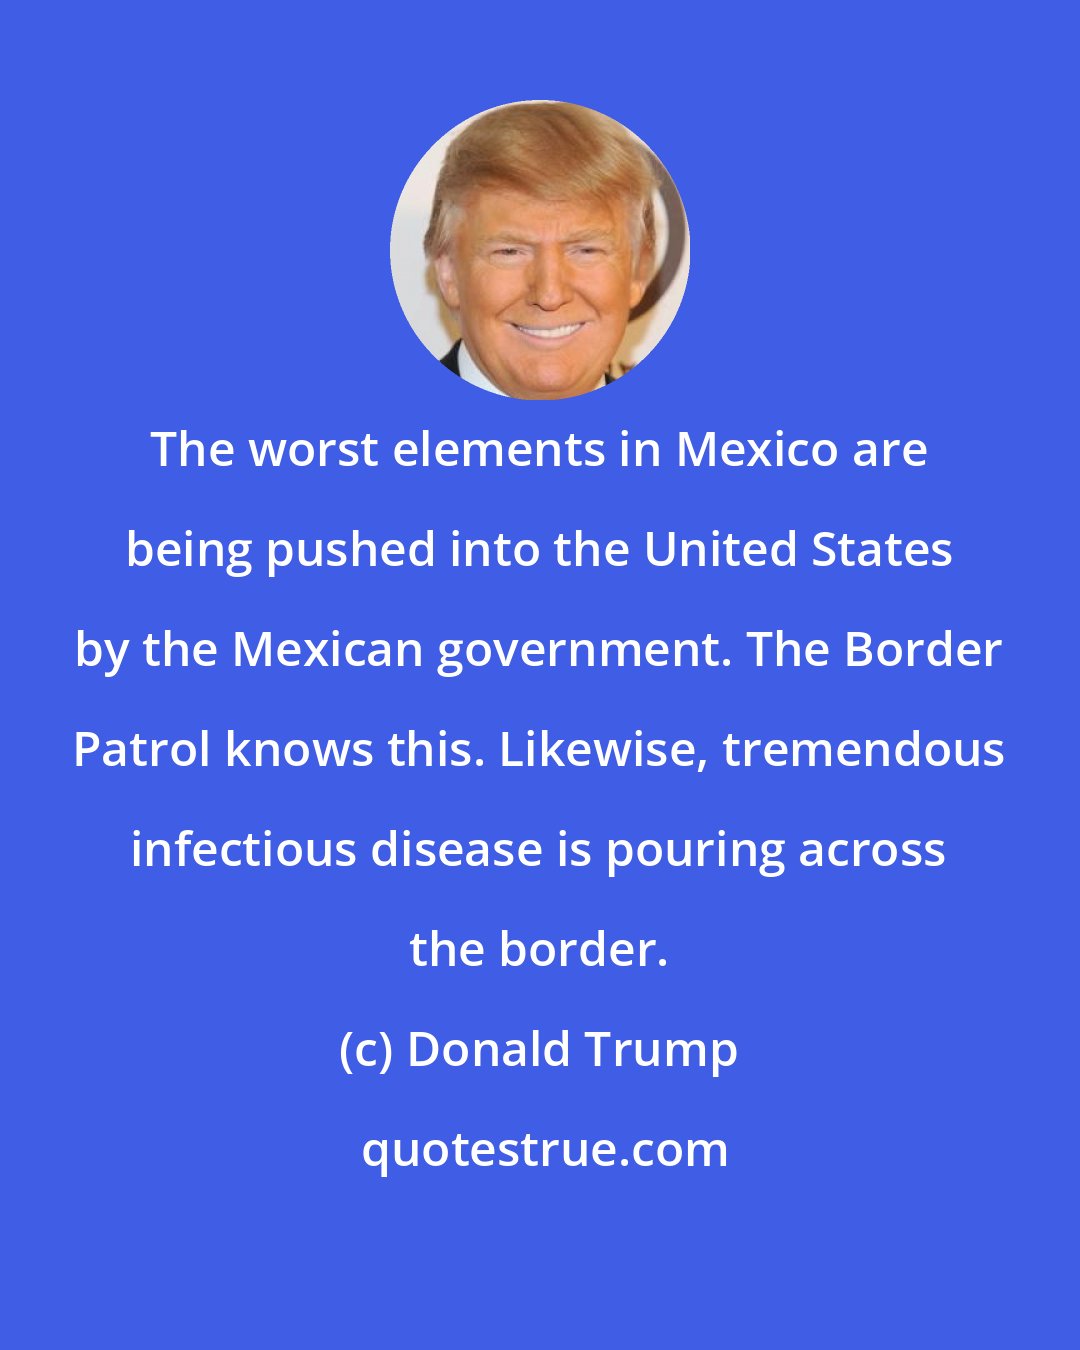 Donald Trump: The worst elements in Mexico are being pushed into the United States by the Mexican government. The Border Patrol knows this. Likewise, tremendous infectious disease is pouring across the border.